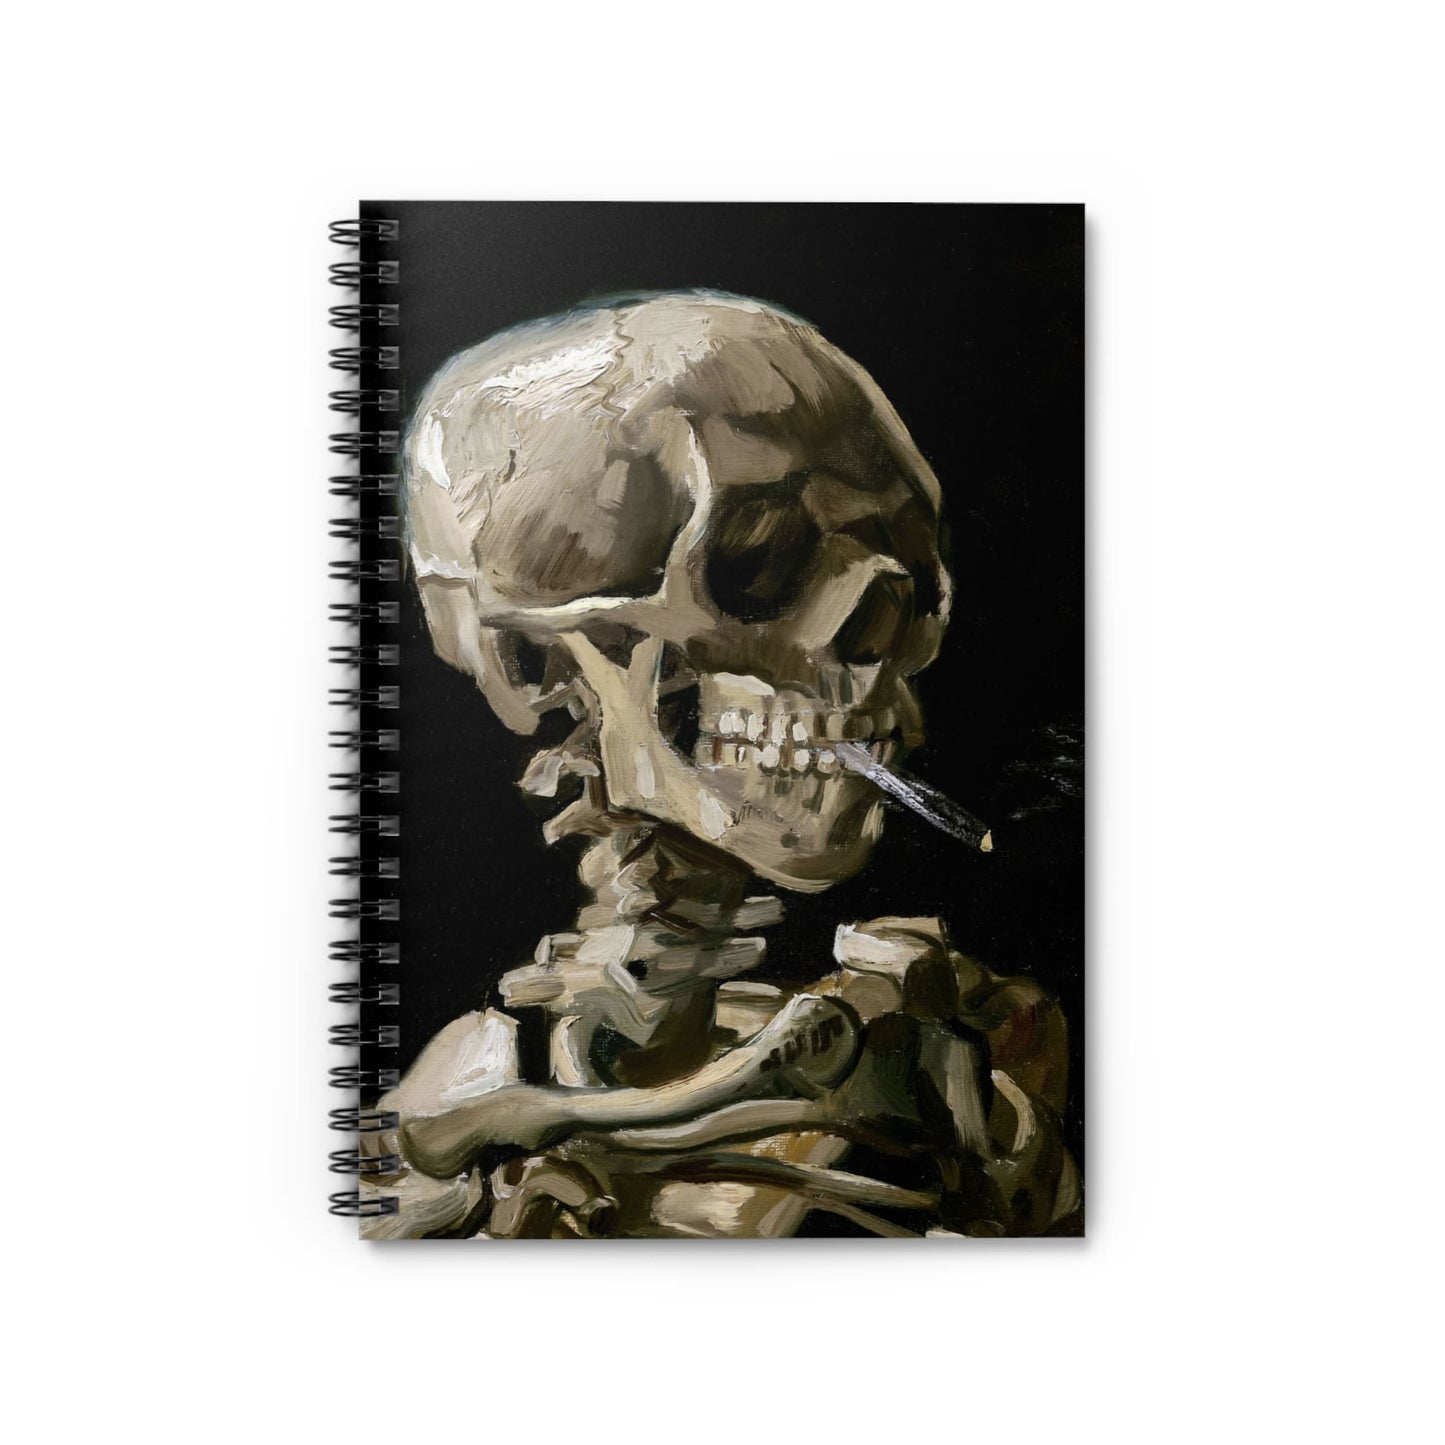 Van Gogh Skeleton Notebook with Burning Cigarette cover, ideal for journaling and planning, showcasing Van Gogh's skeleton with a burning cigarette.